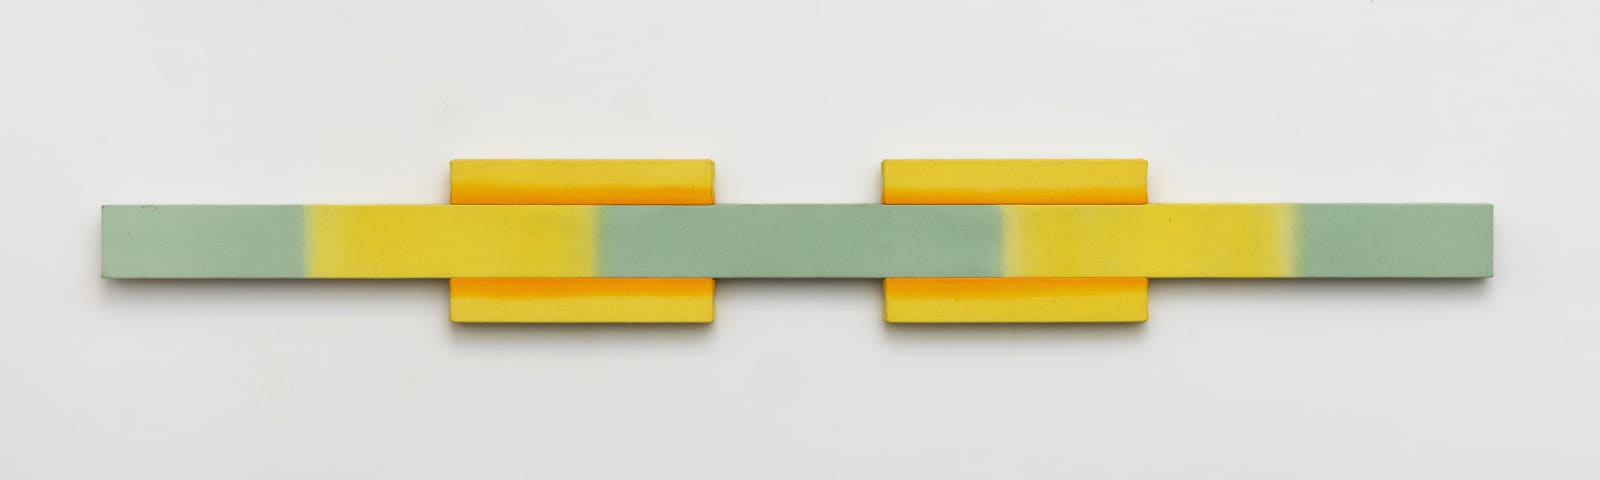 Horizontal shaped canvas painting stretched on five wooden bars varying in length and colors of yellow, orange, and mint green.